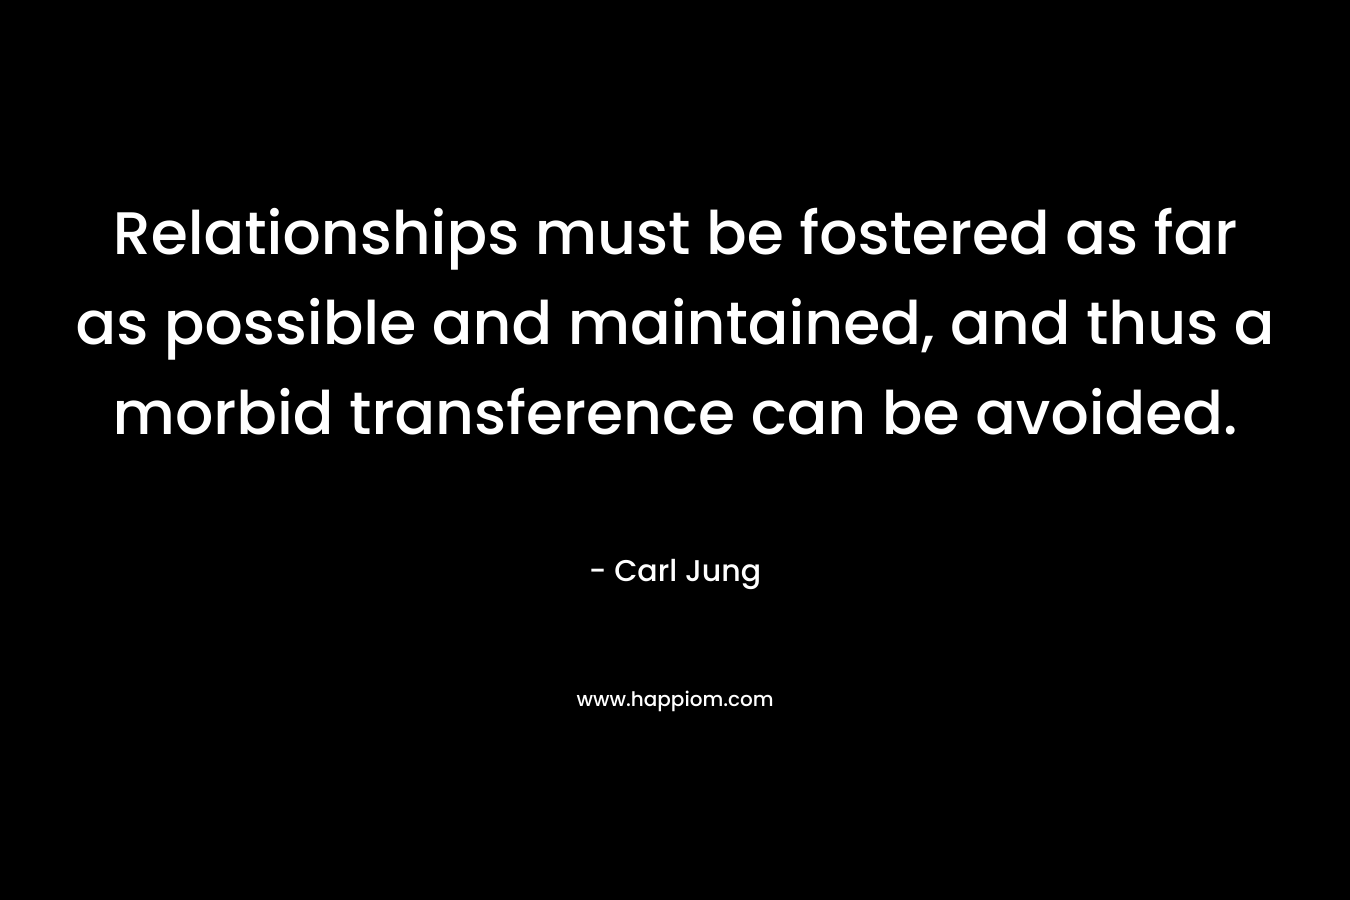 Relationships must be fostered as far as possible and maintained, and thus a morbid transference can be avoided.